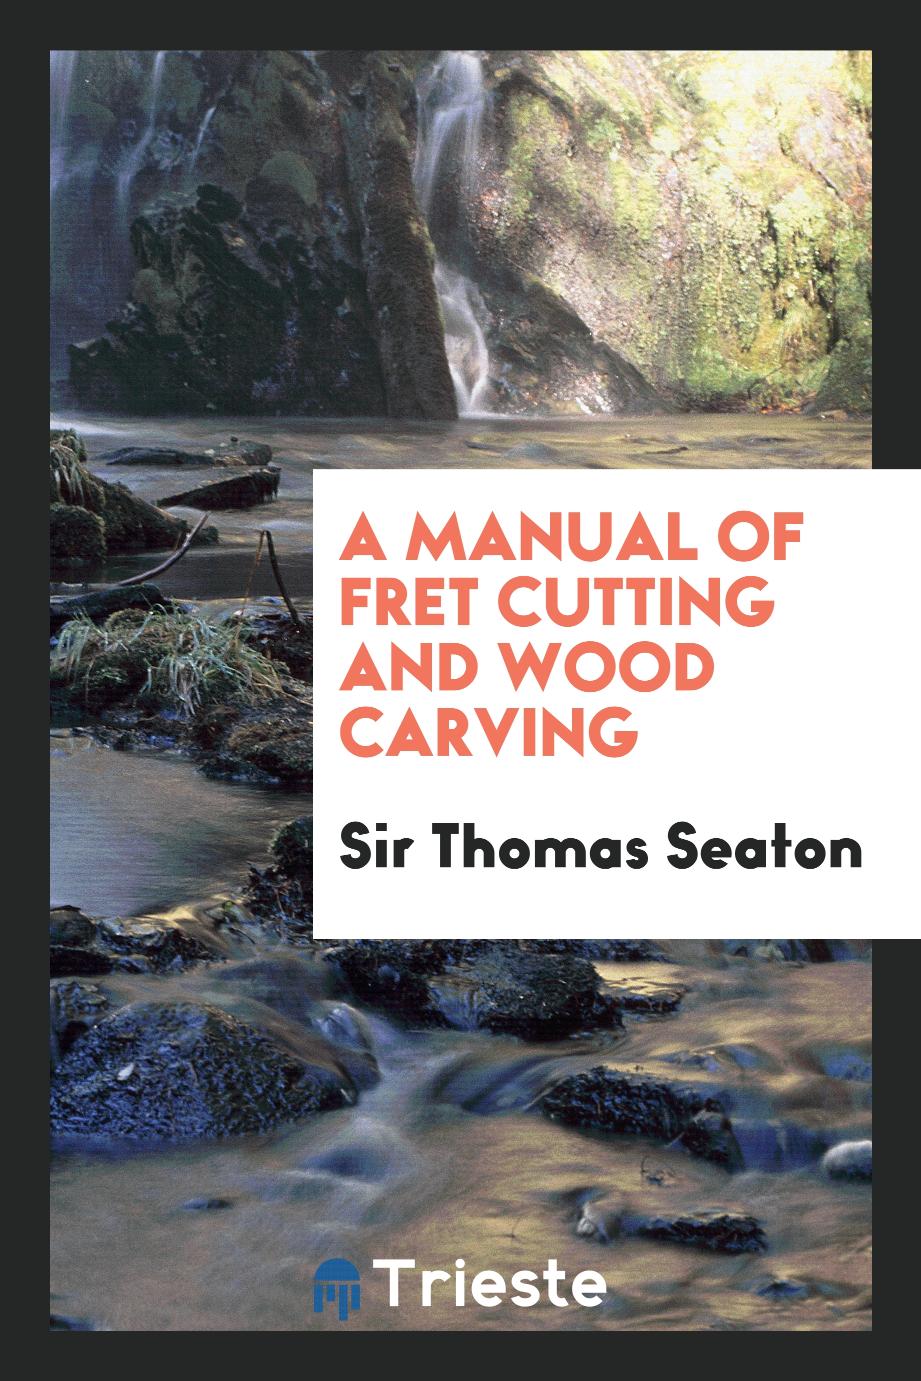 Sir Thomas Seaton - A Manual of Fret Cutting and Wood Carving